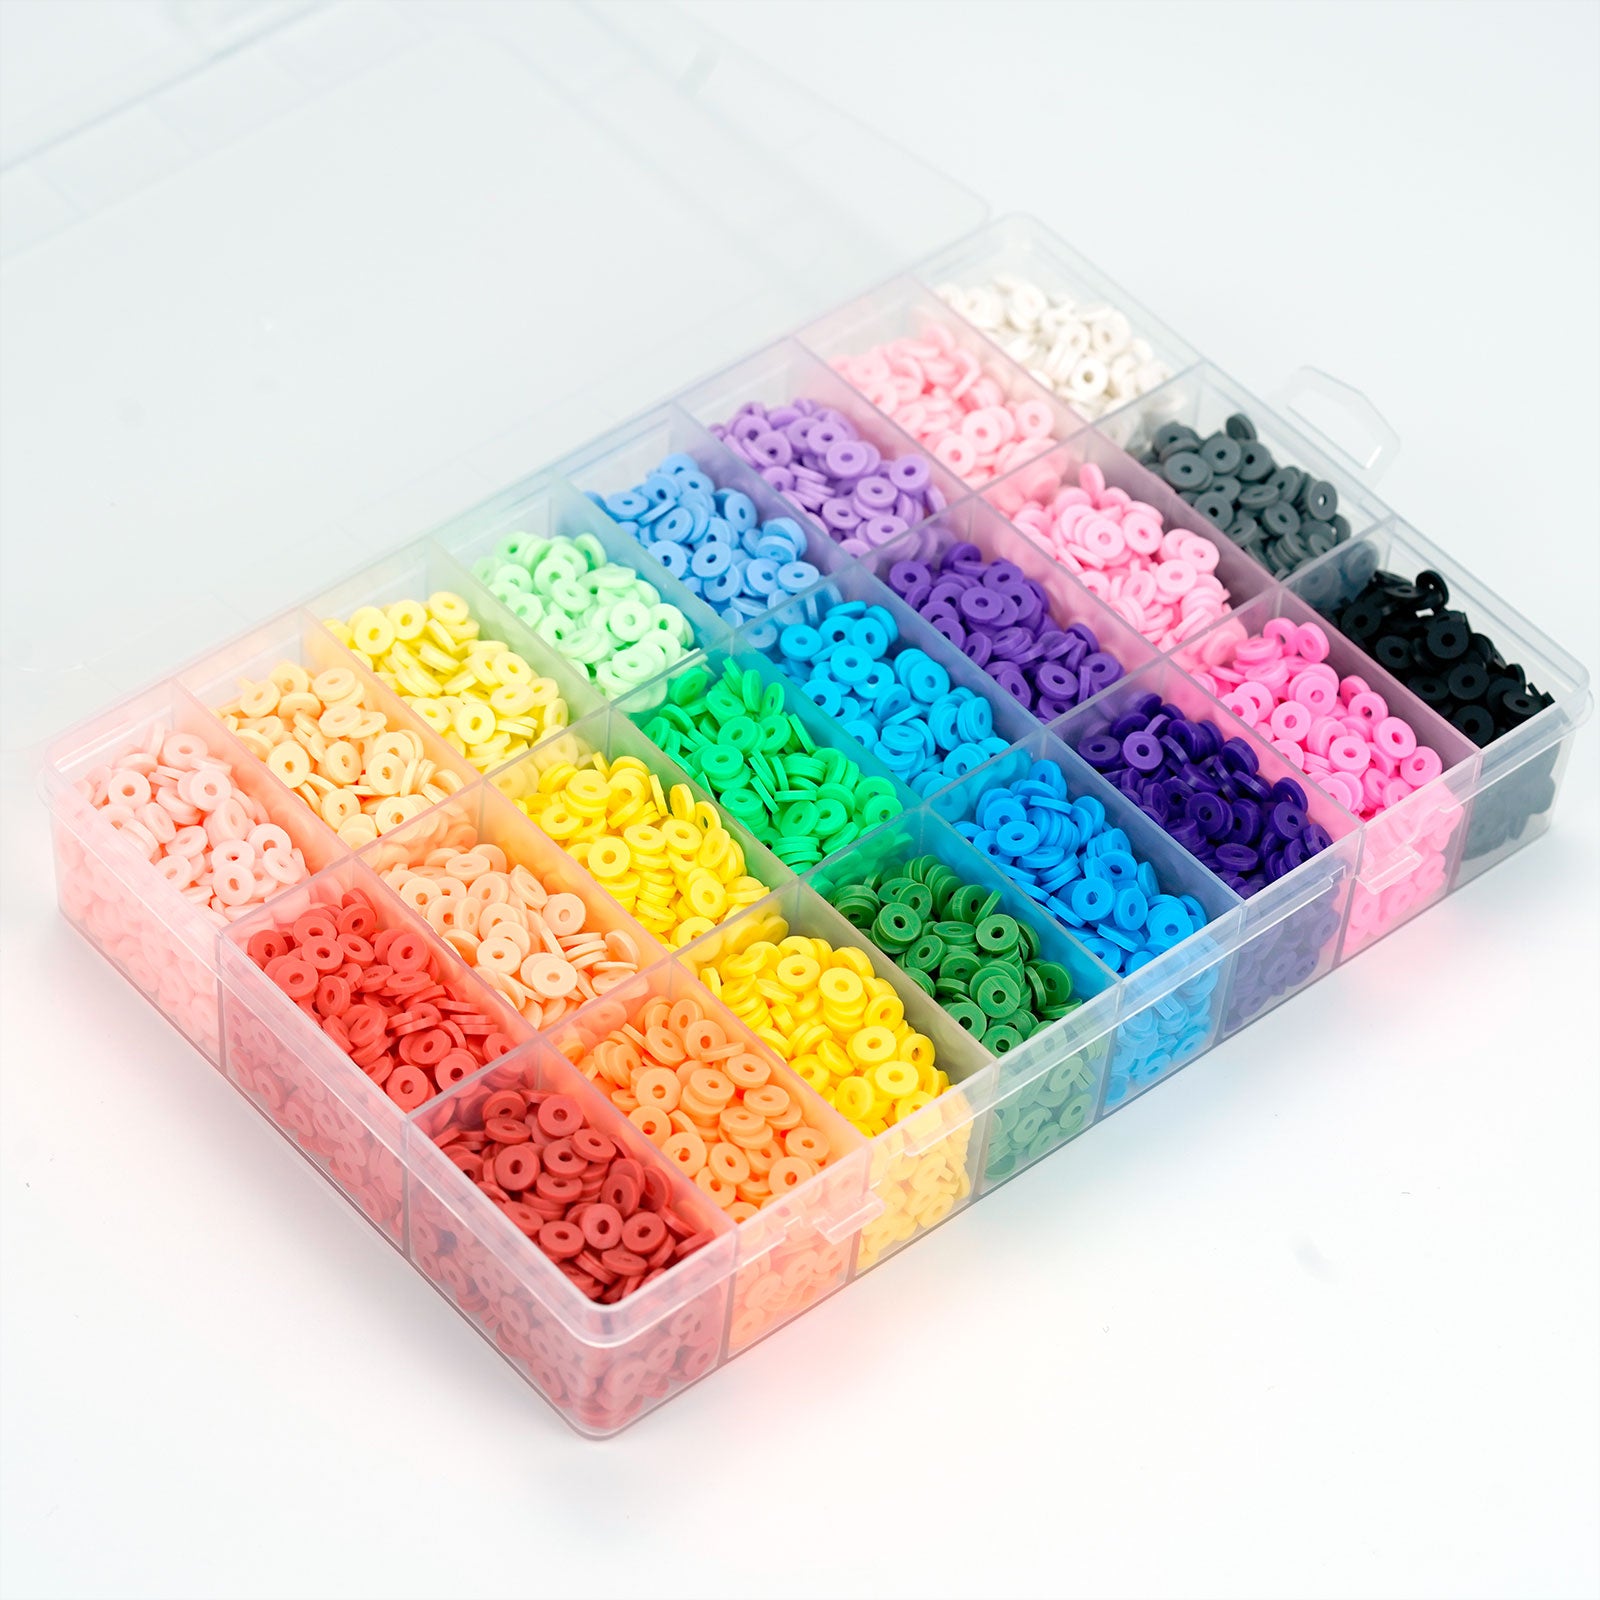 ORNSHIZI Size 2mm Seed Beads 24 Crayon Colors in Grid Storage Box Total  About 20000pcs, 12/0 Small Seed Beads for Bracelet Jewelry Making